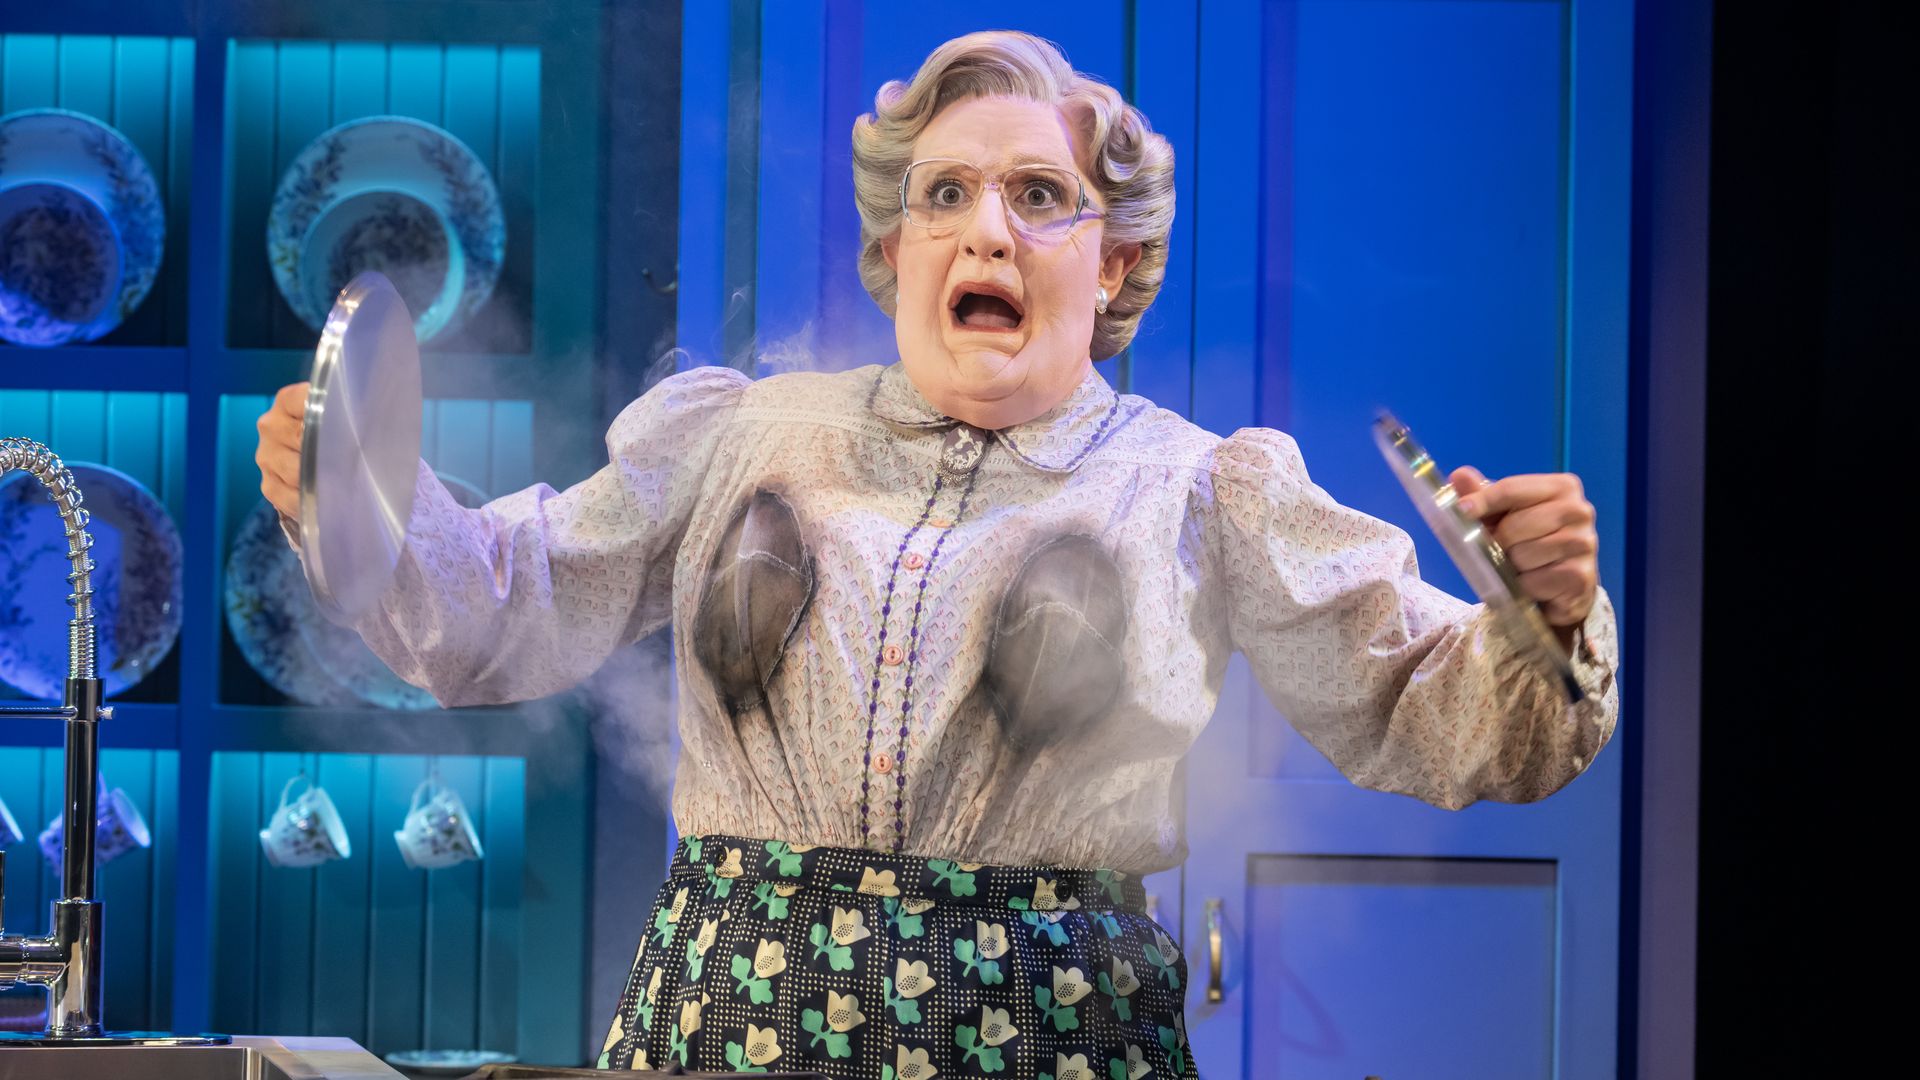 An actor plays Mrs. Doubtfire in a musical version of the film. 